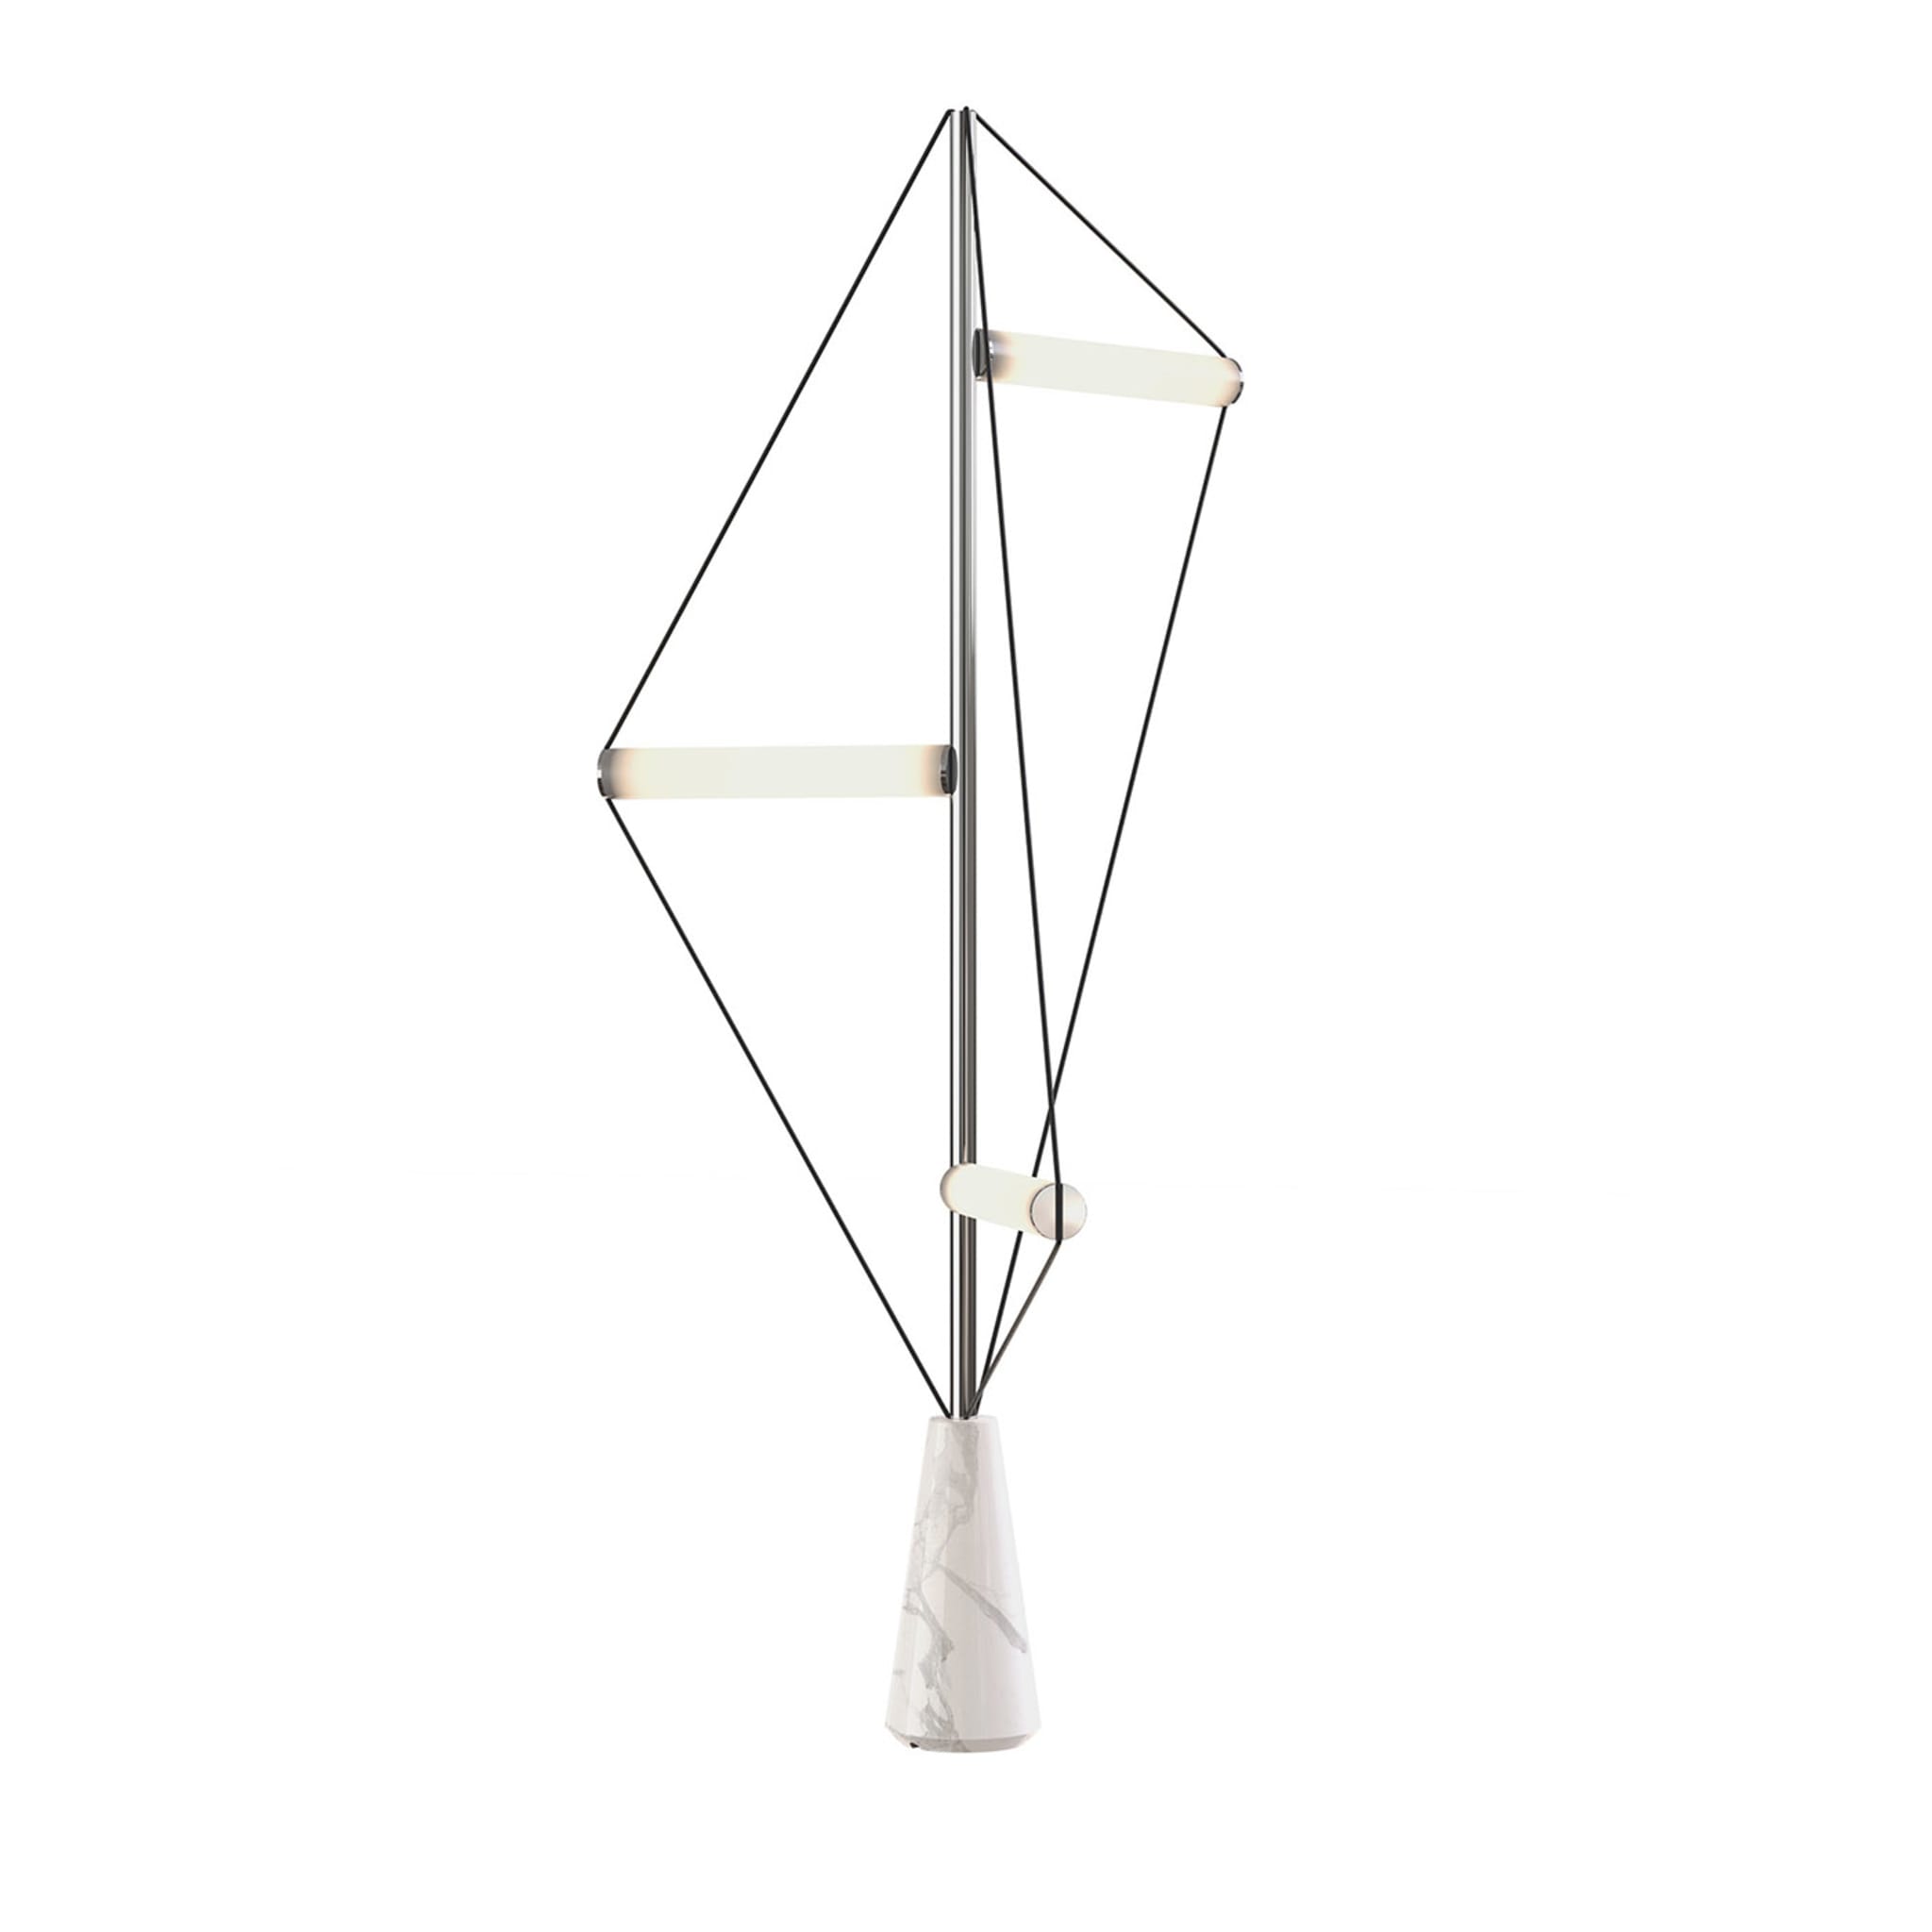 Ed047 Chrome Floor Lamp with White Base - Main view